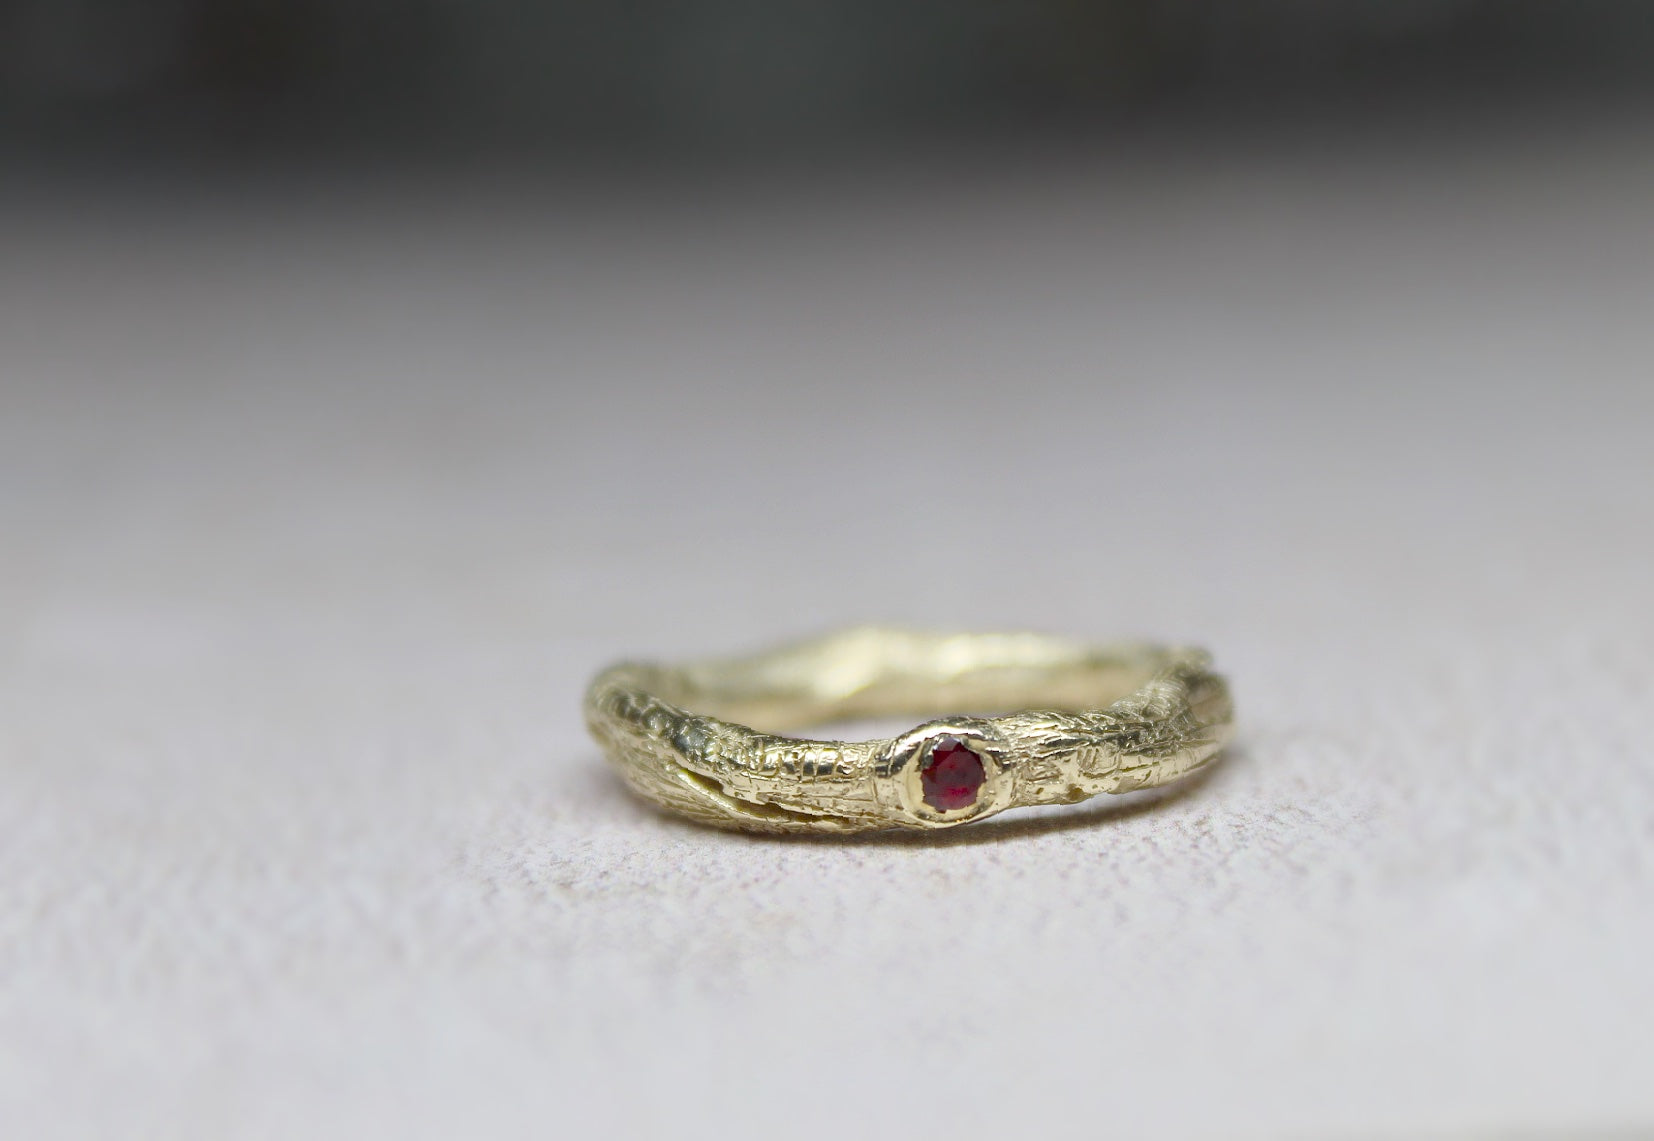 9ct Gold Twig Ring with Zircon - One of a Kind Alternative Engagement Ring